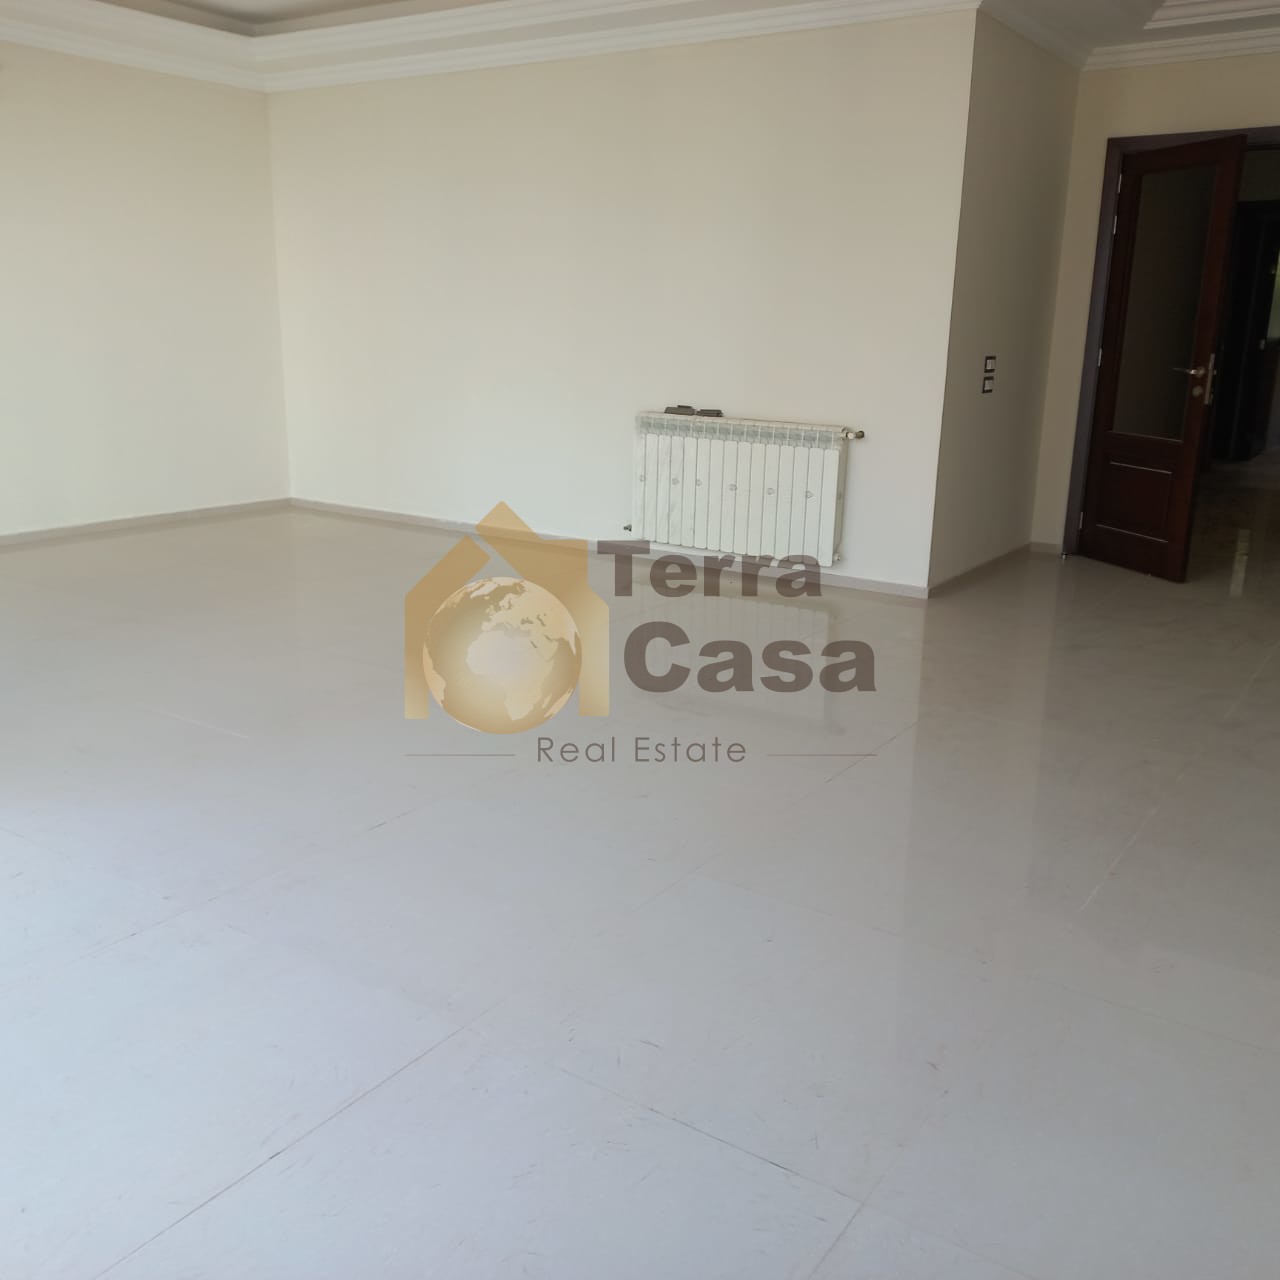 Brand new apartment with terrace cash payment .Ref#3245